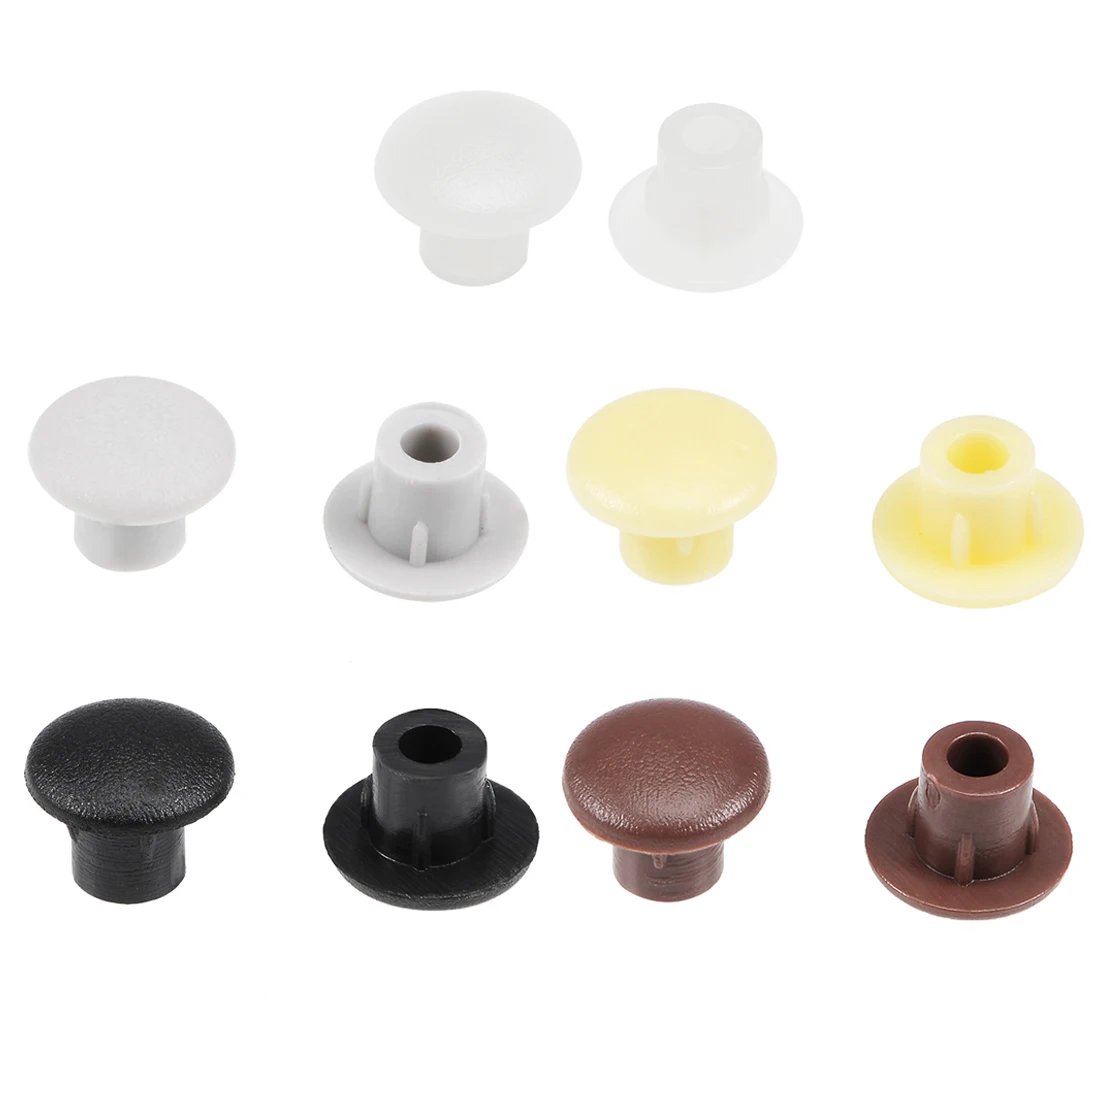 

uxcell 50/100/200Pcs Screw Cap Cover 5mm Dia. Plastic Locking Hole Plug Button Top Flush Type for Cabinet Cupboard Shelf